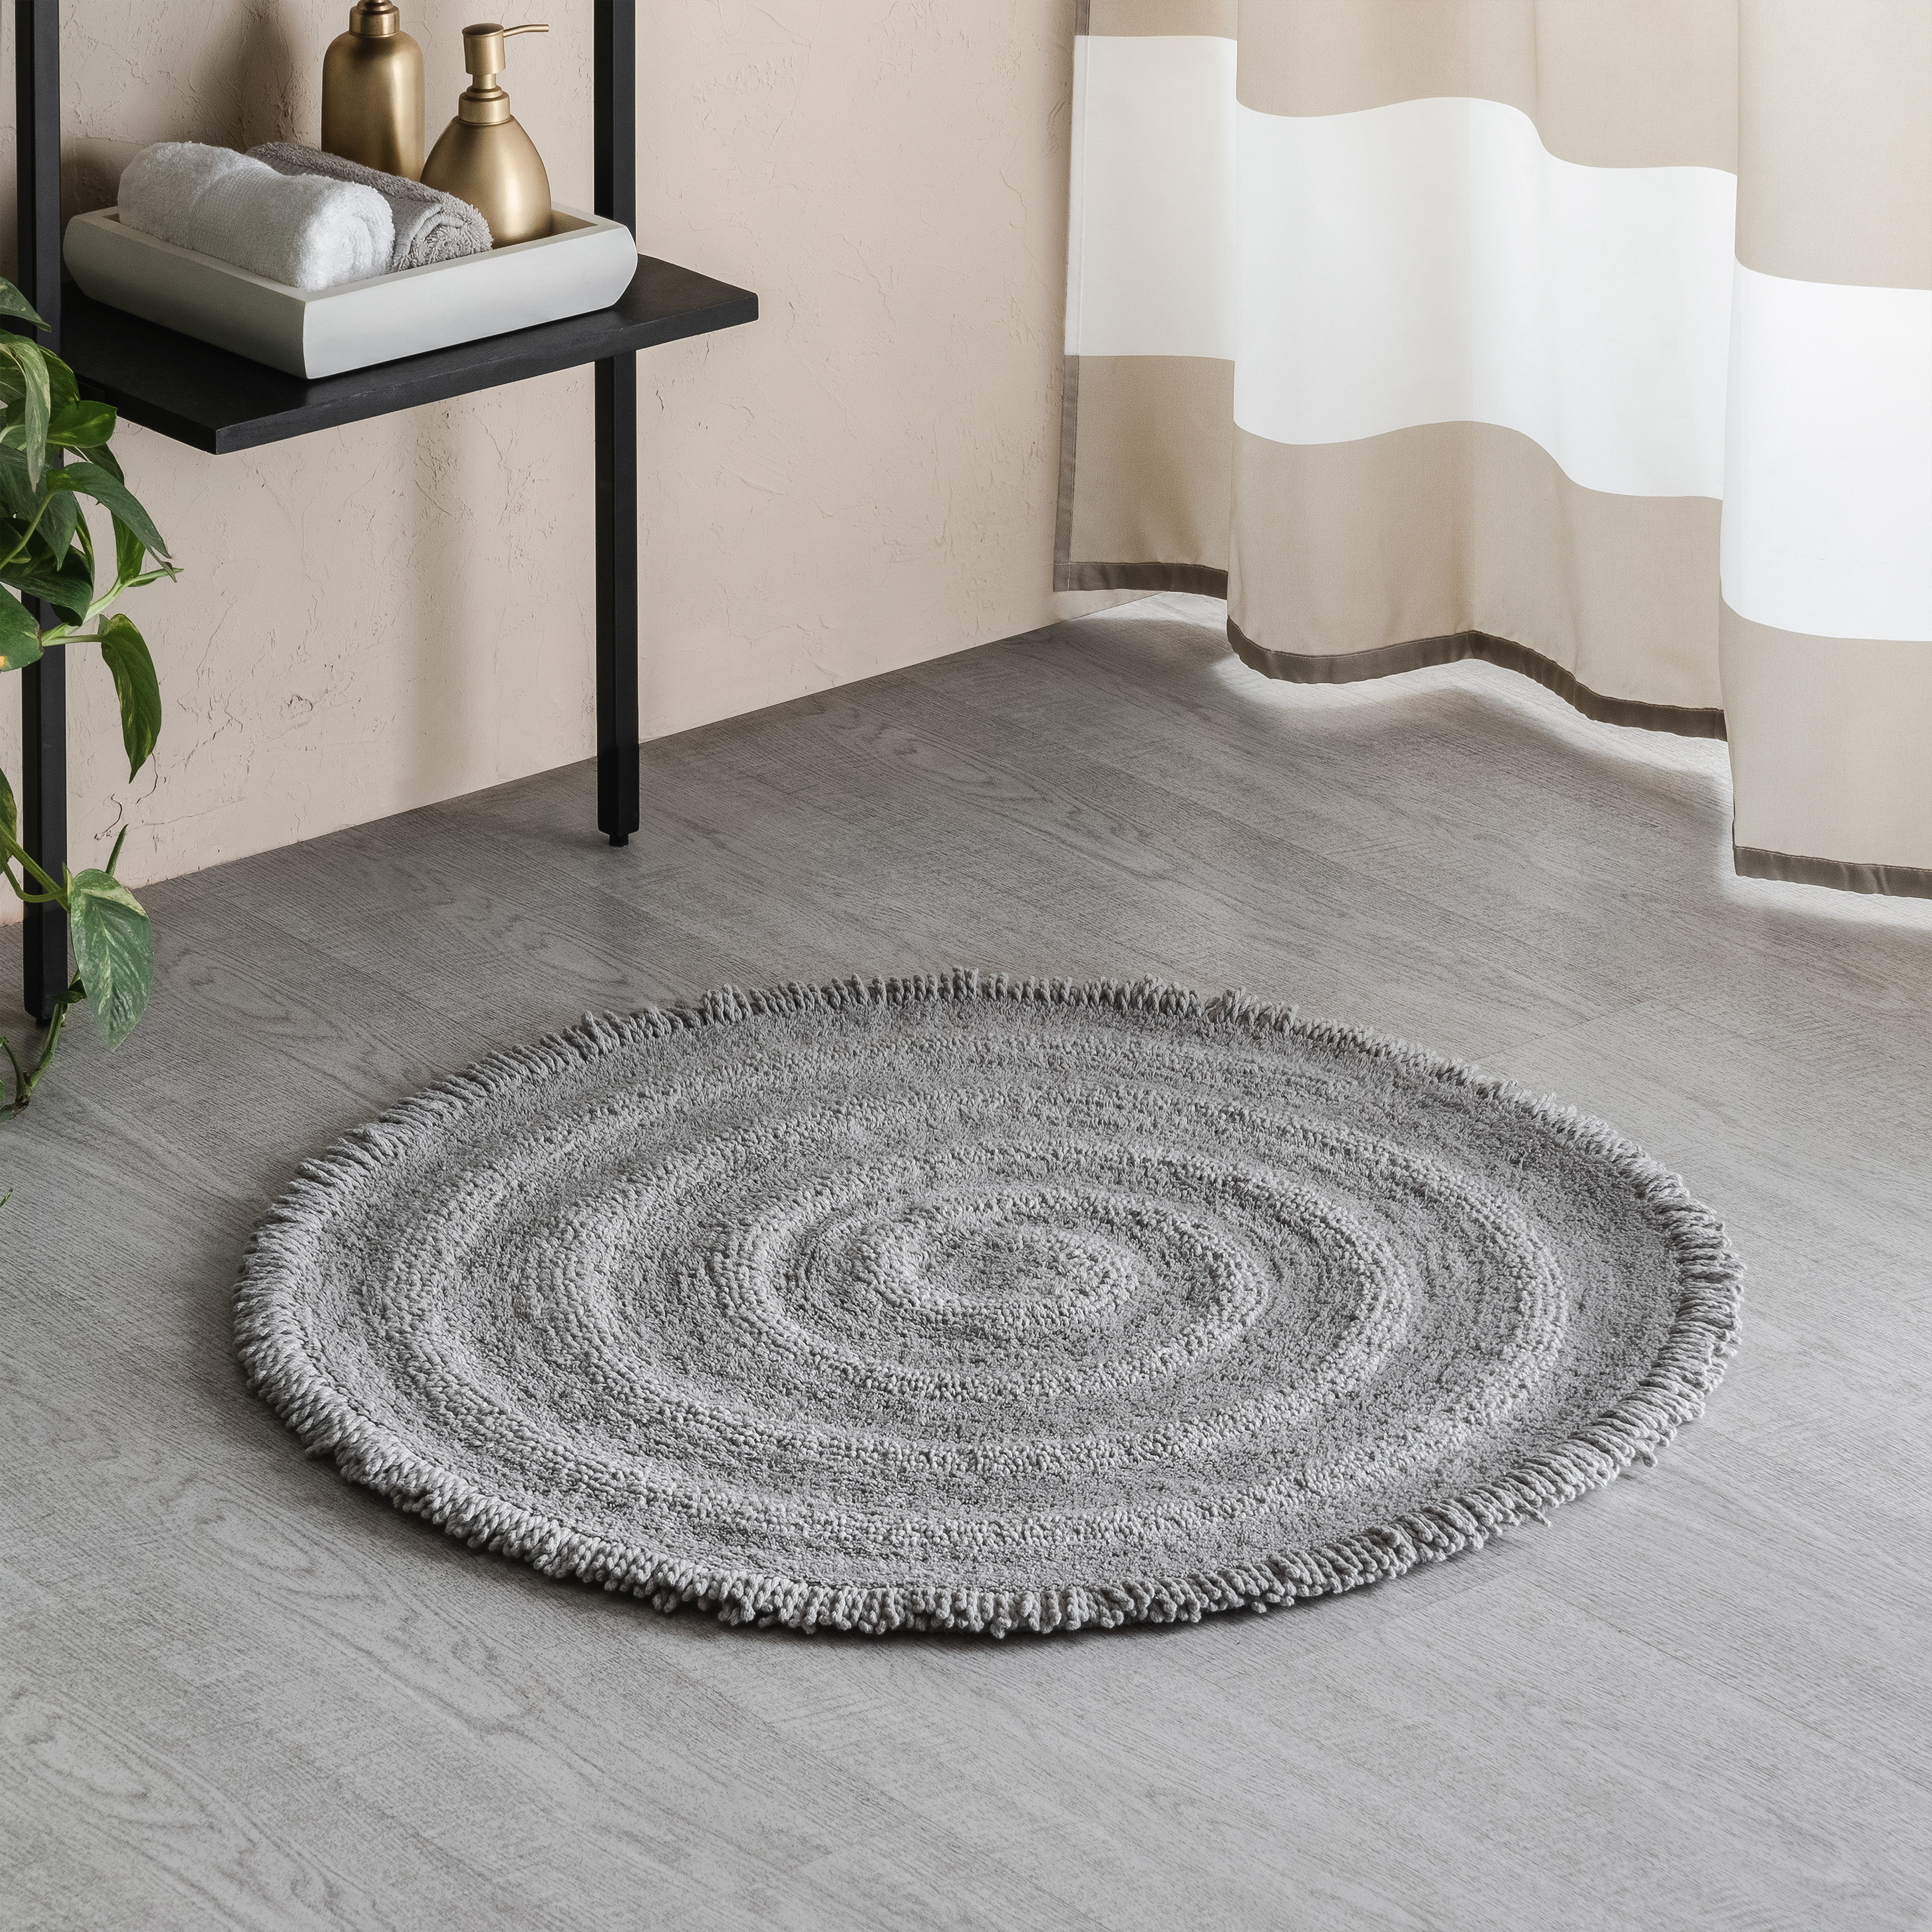 Tufting Rug Backing - Anti-Slip Perfect For Safe And Stable Rugs